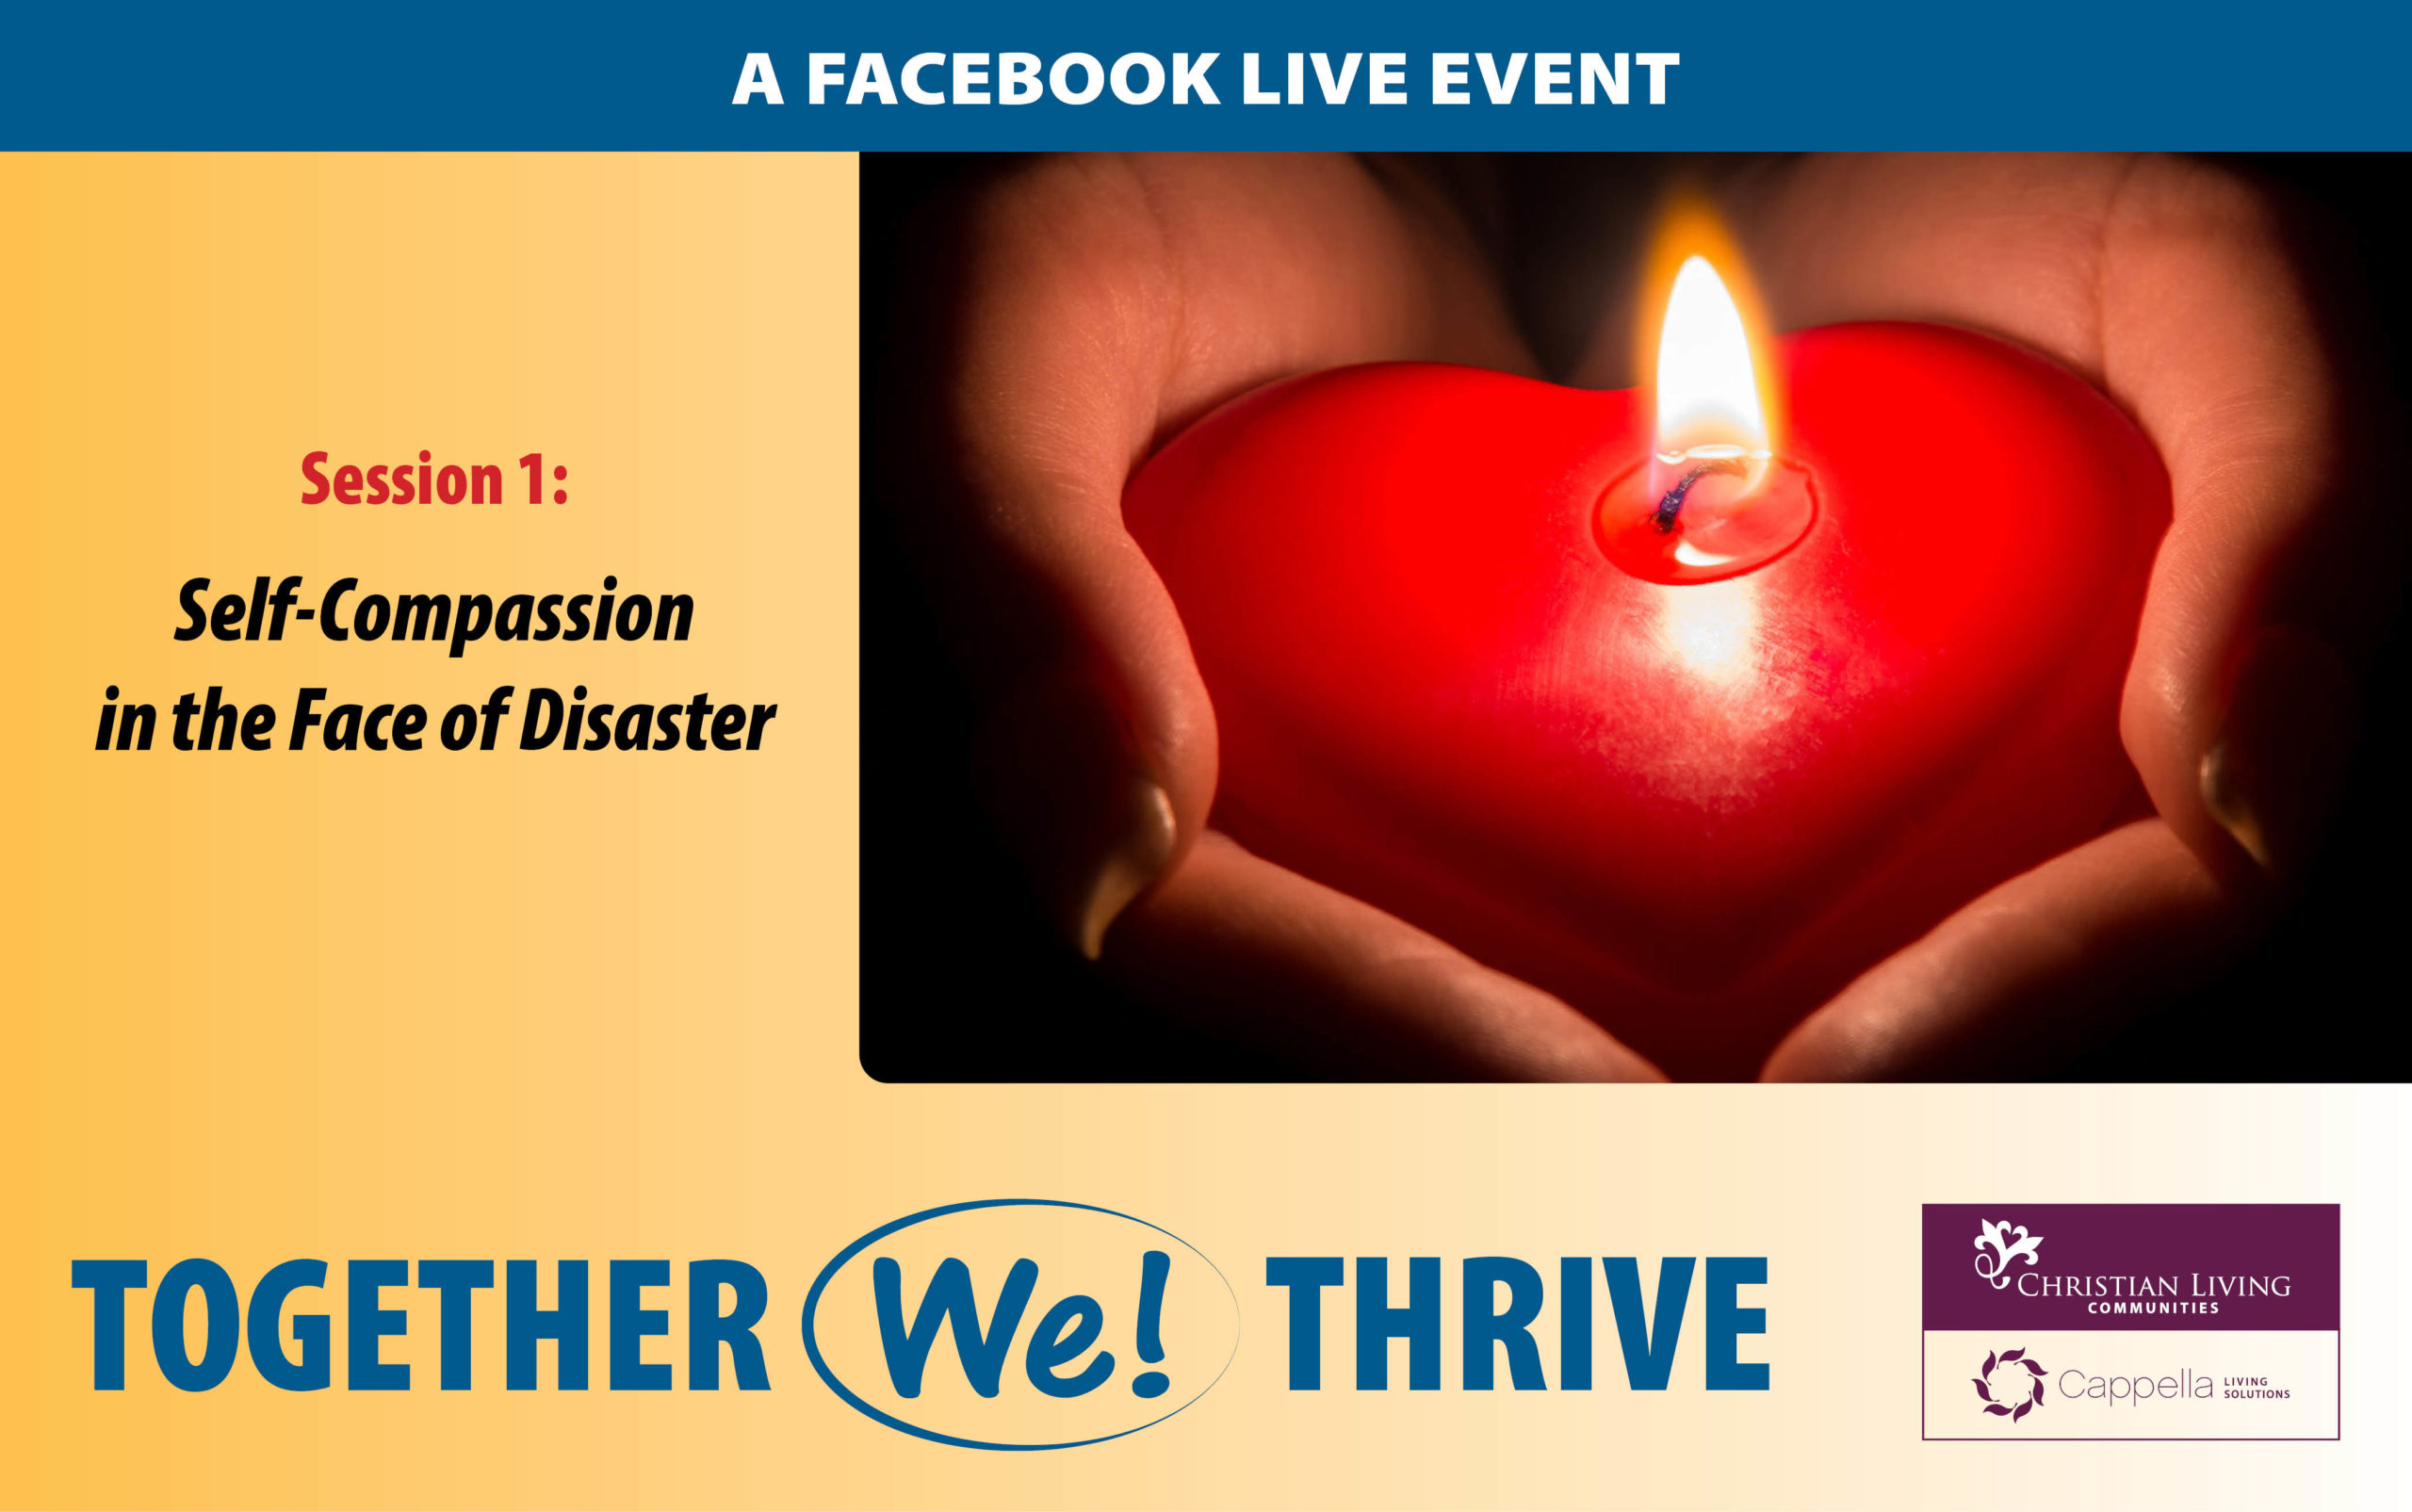 Together We! Thrive Facebook Live Event - Self-Compassion in the Face of Disaster.